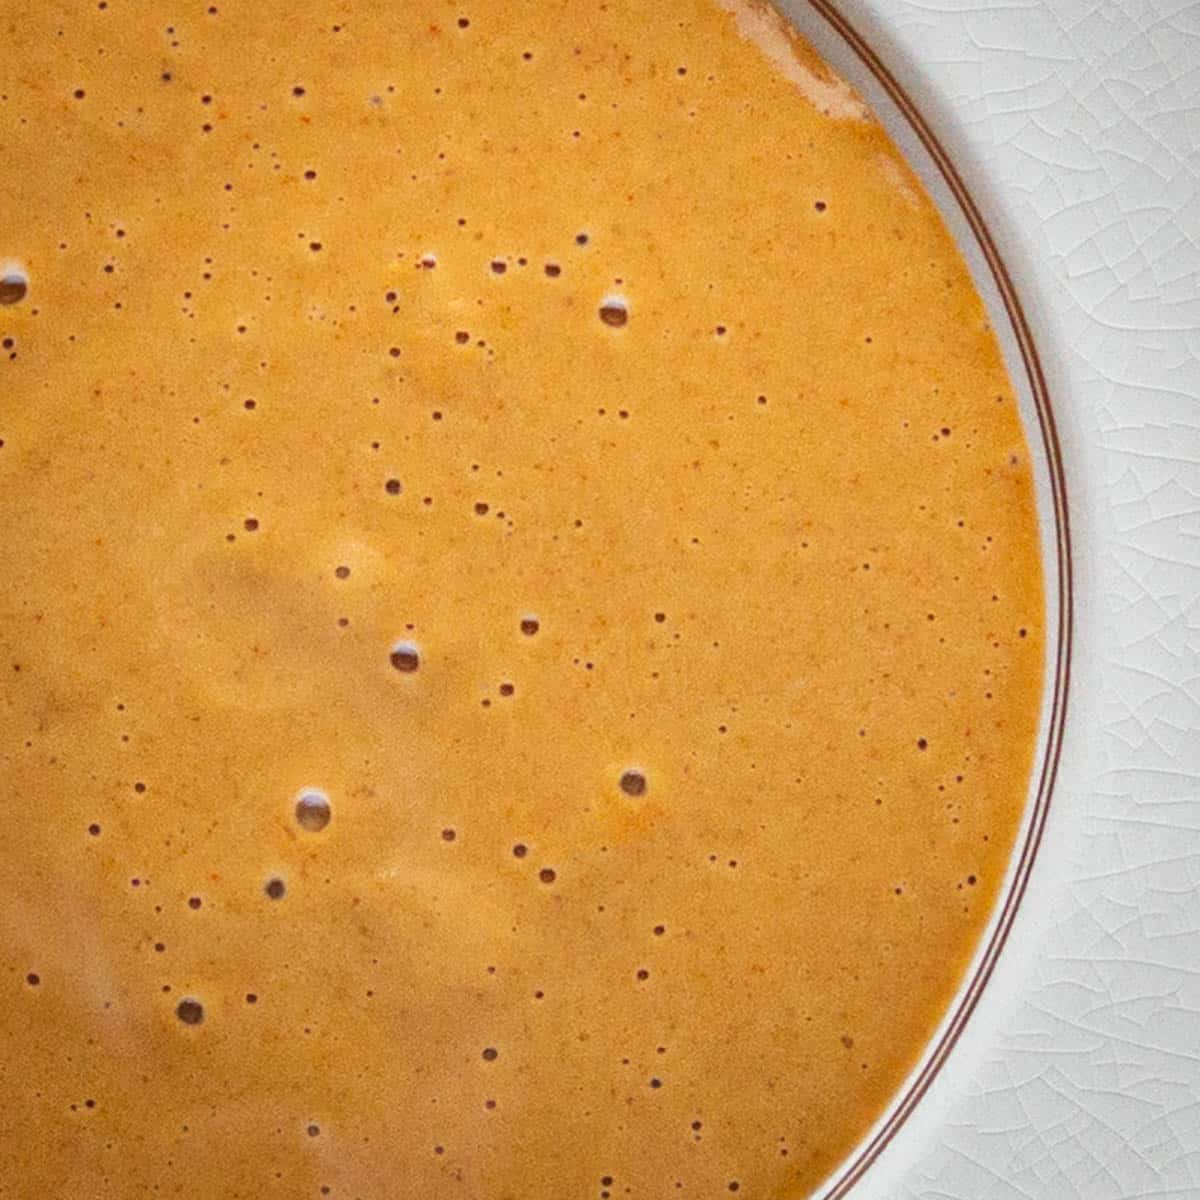 A close up of orange soup in a bowl showing bubbles